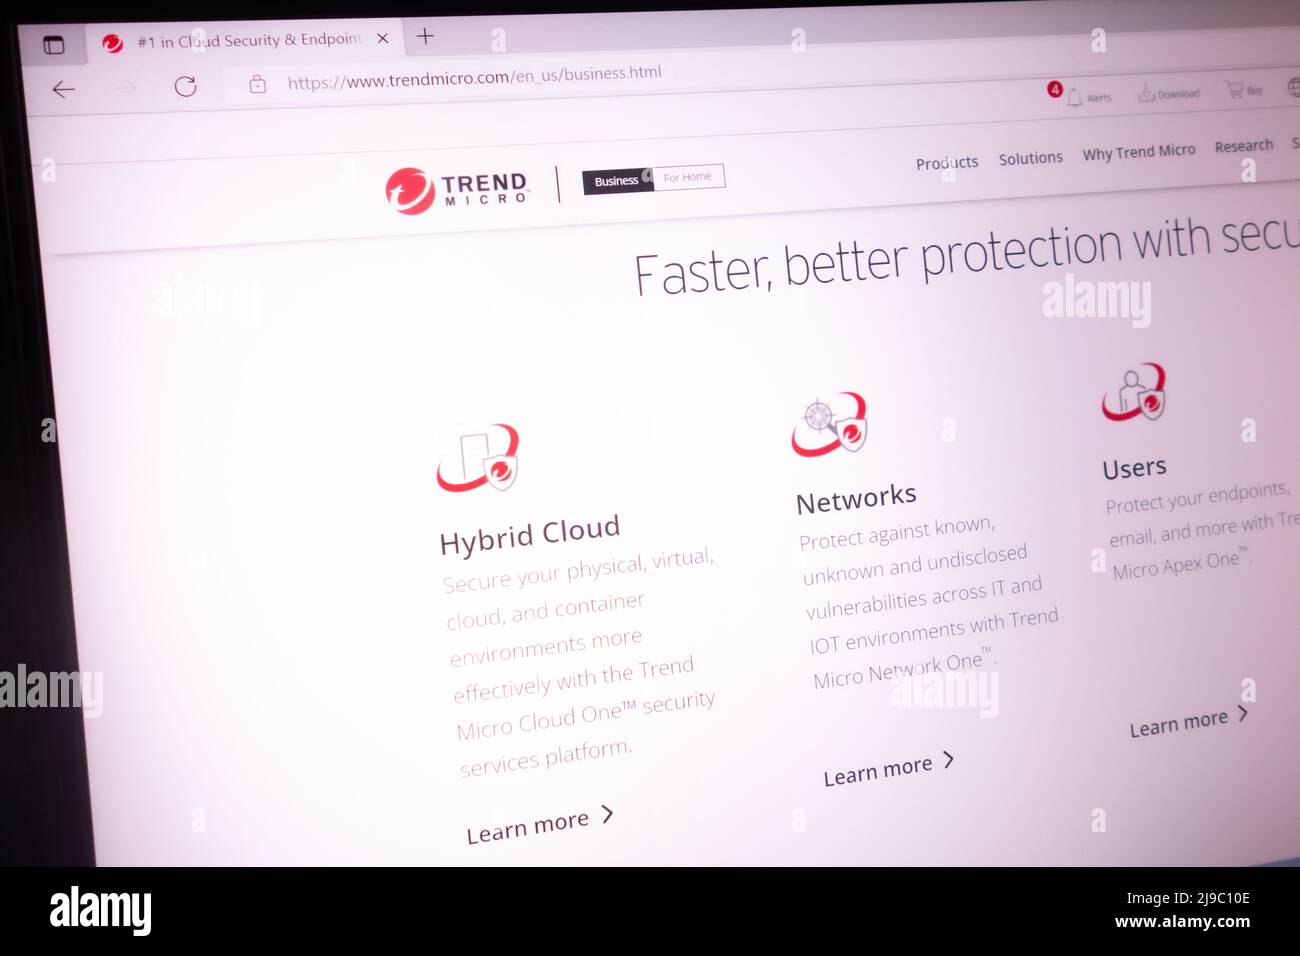 KONSKIE, POLAND - May 21, 2022: www.trendmicro.com website displayed on laptop screen. Trend Micro Inc is a Japanese multinational cyber security soft Stock Photo